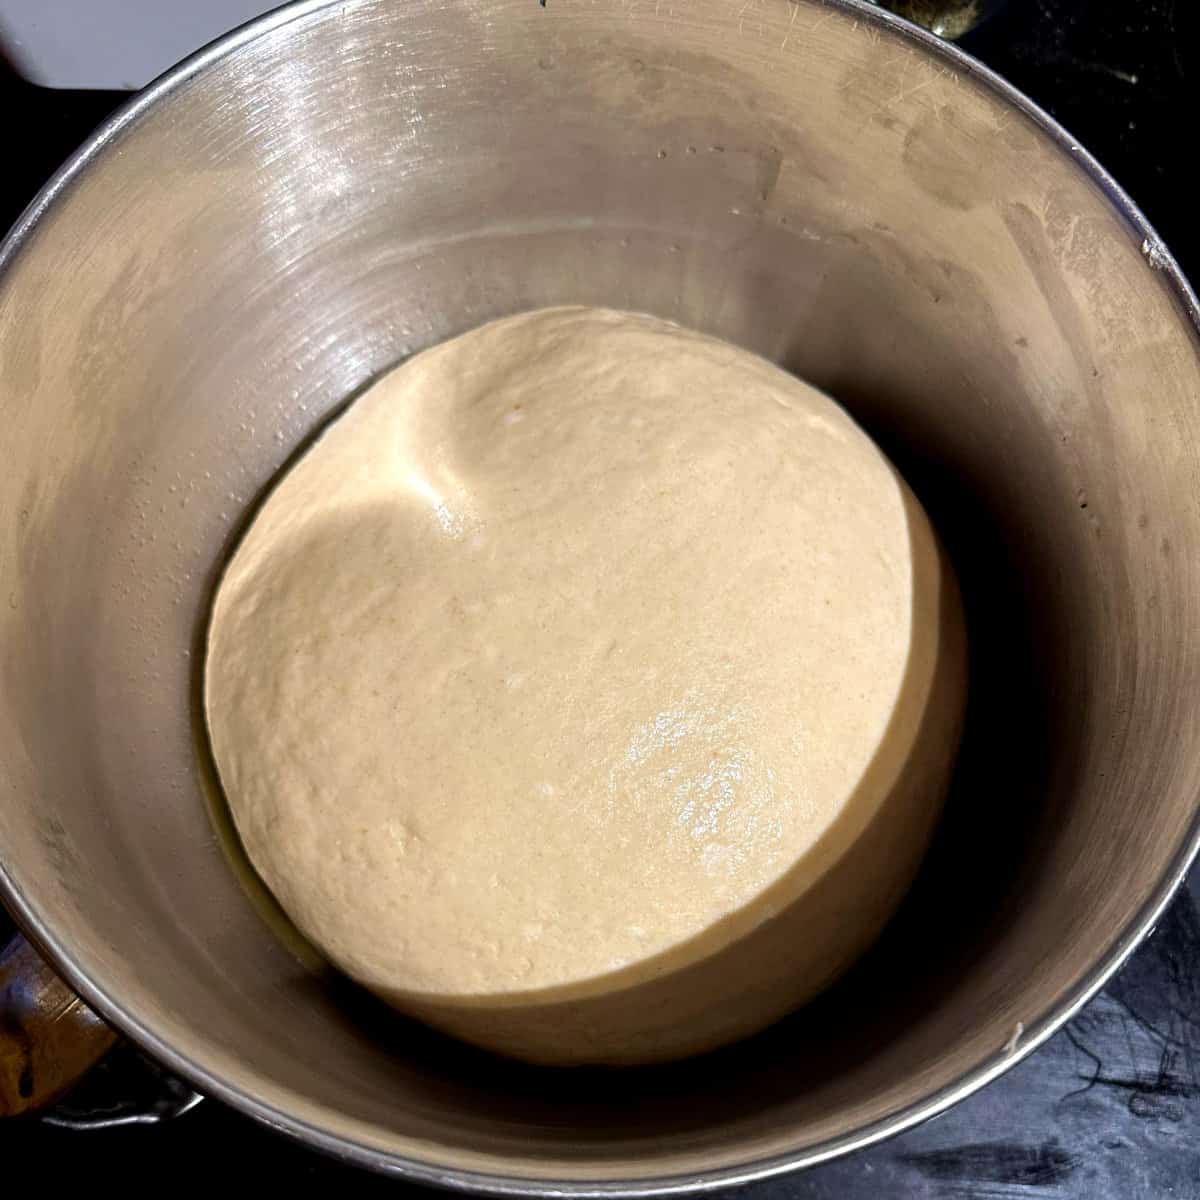 Sourdough sandwich bread dough after rising for two hours.